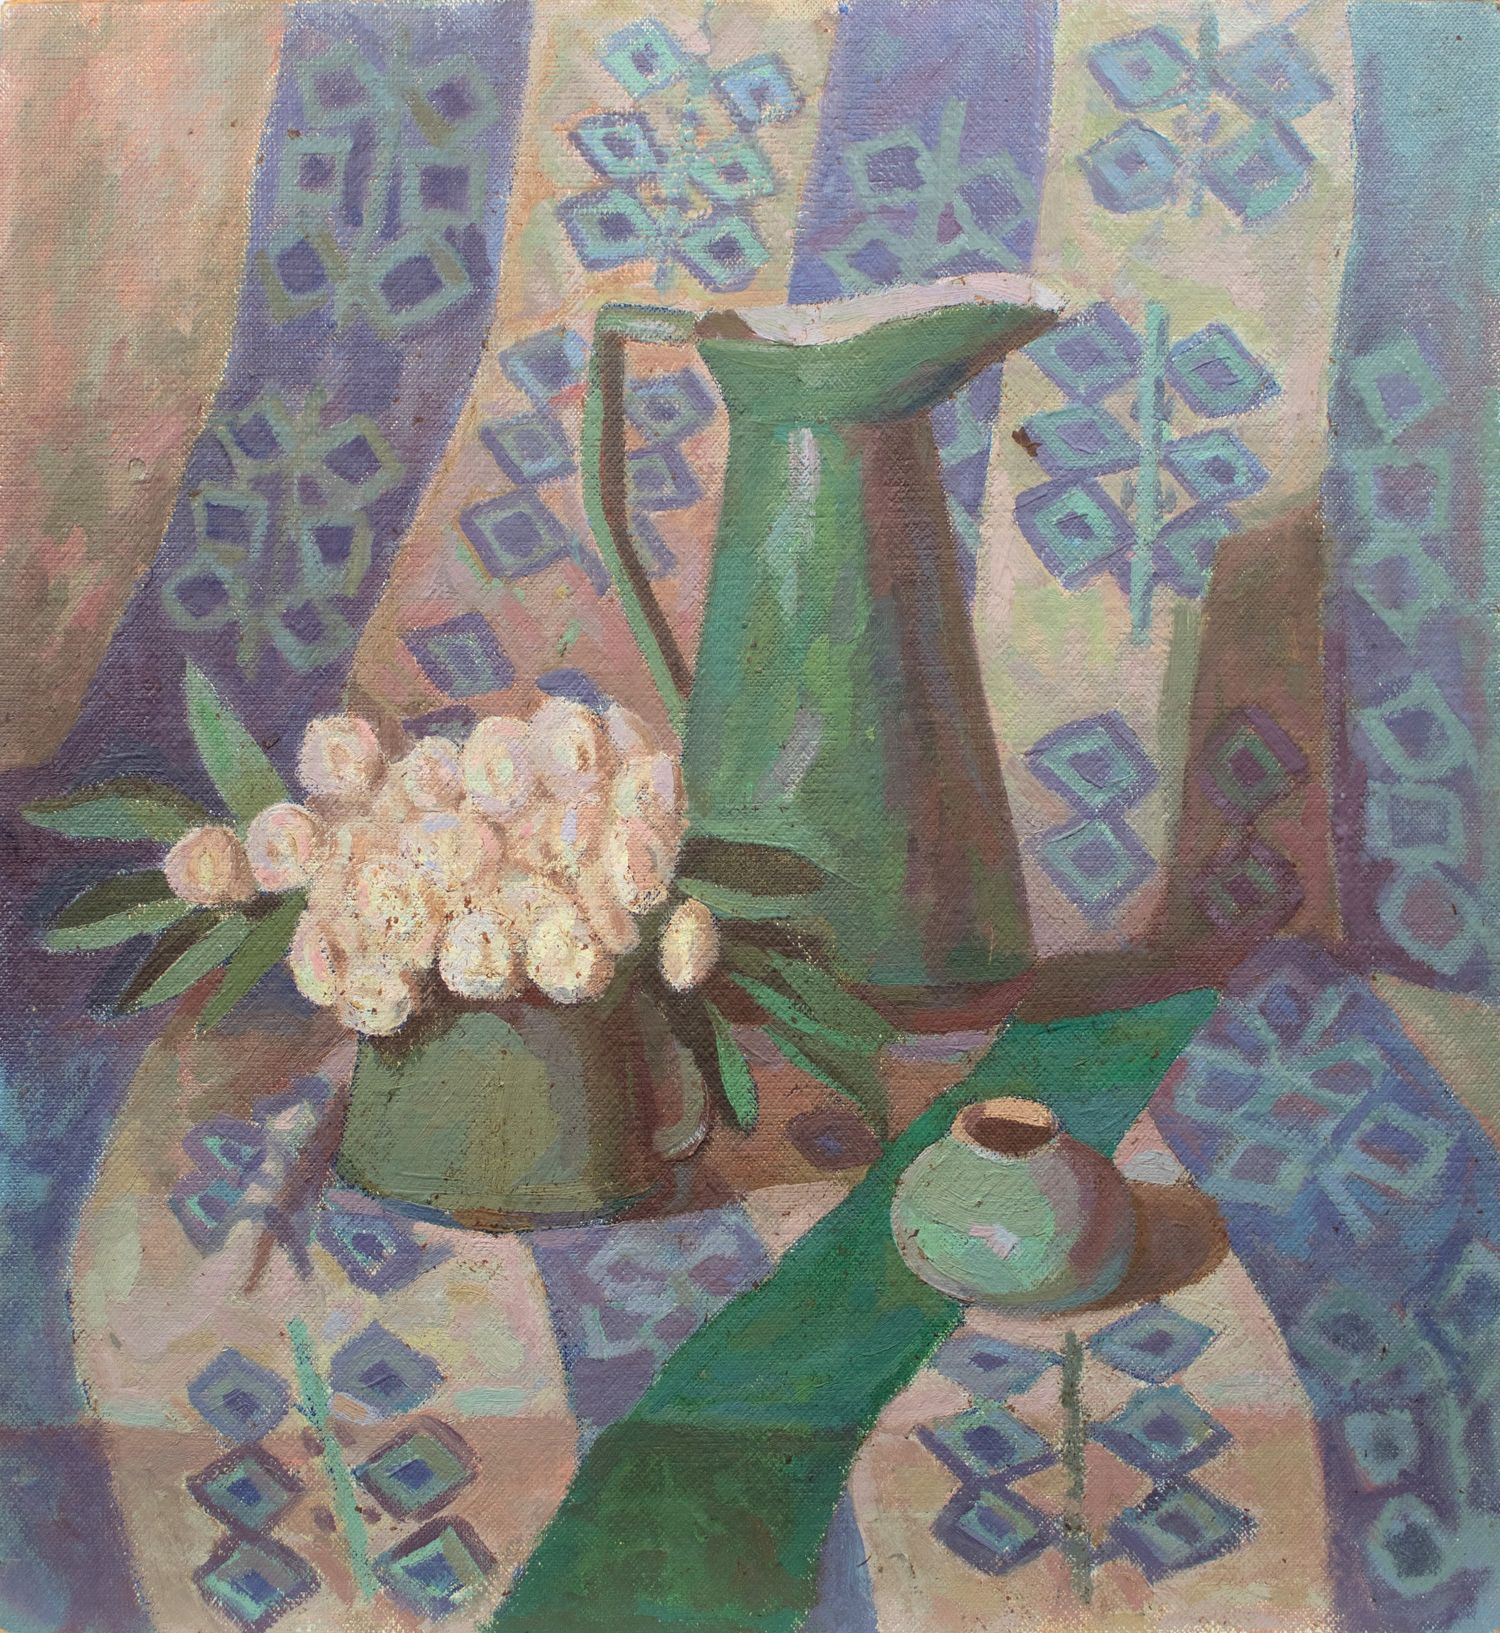 "Still life with green cloth"